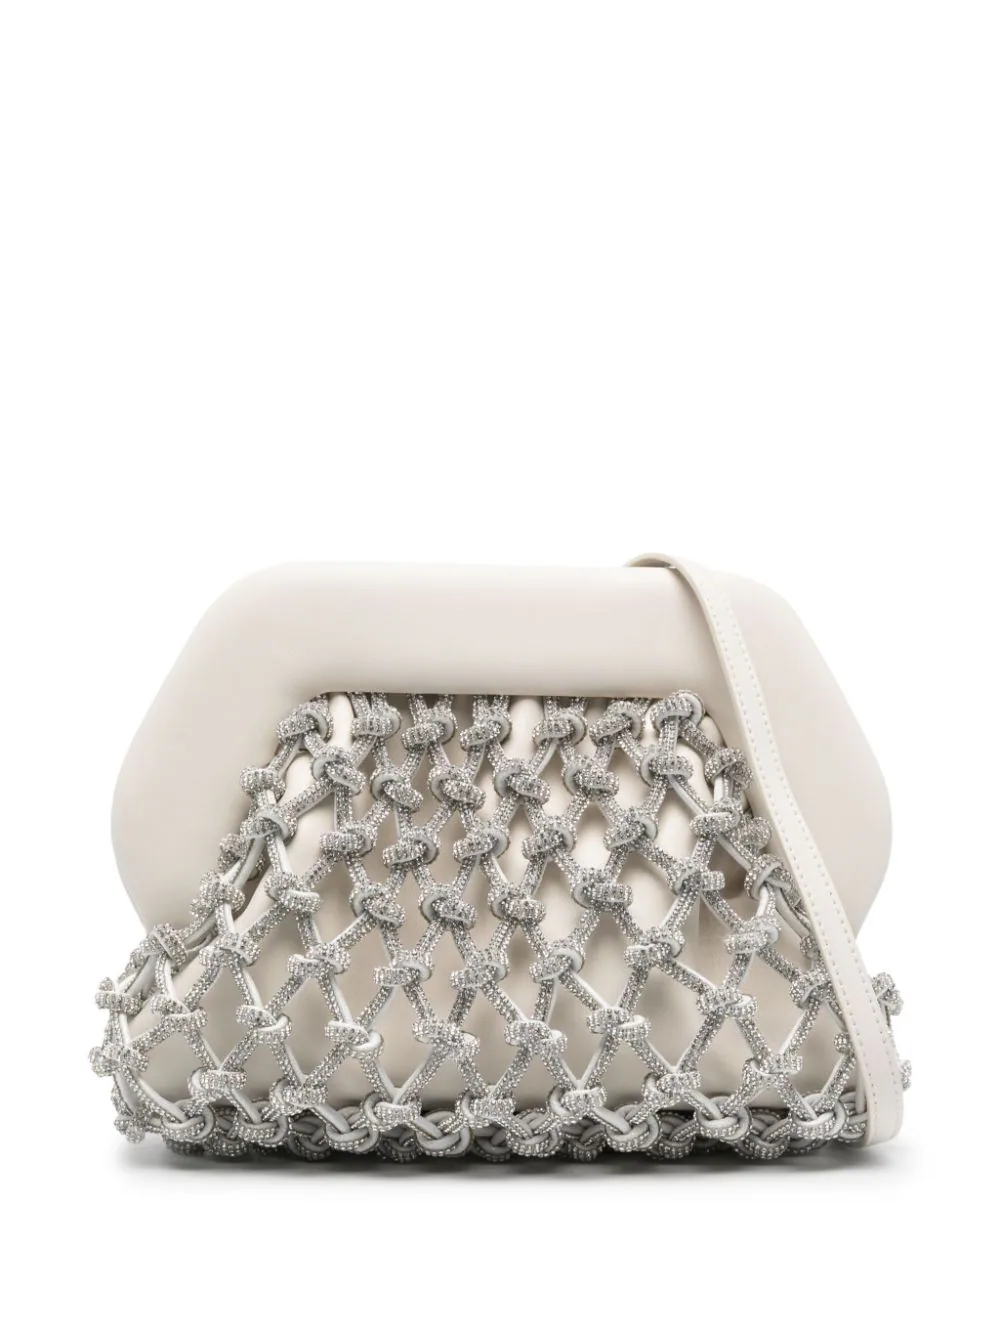 Shop Themoire' Tia Knots Clutch Bag Embellished With Rhinestones In Metallic